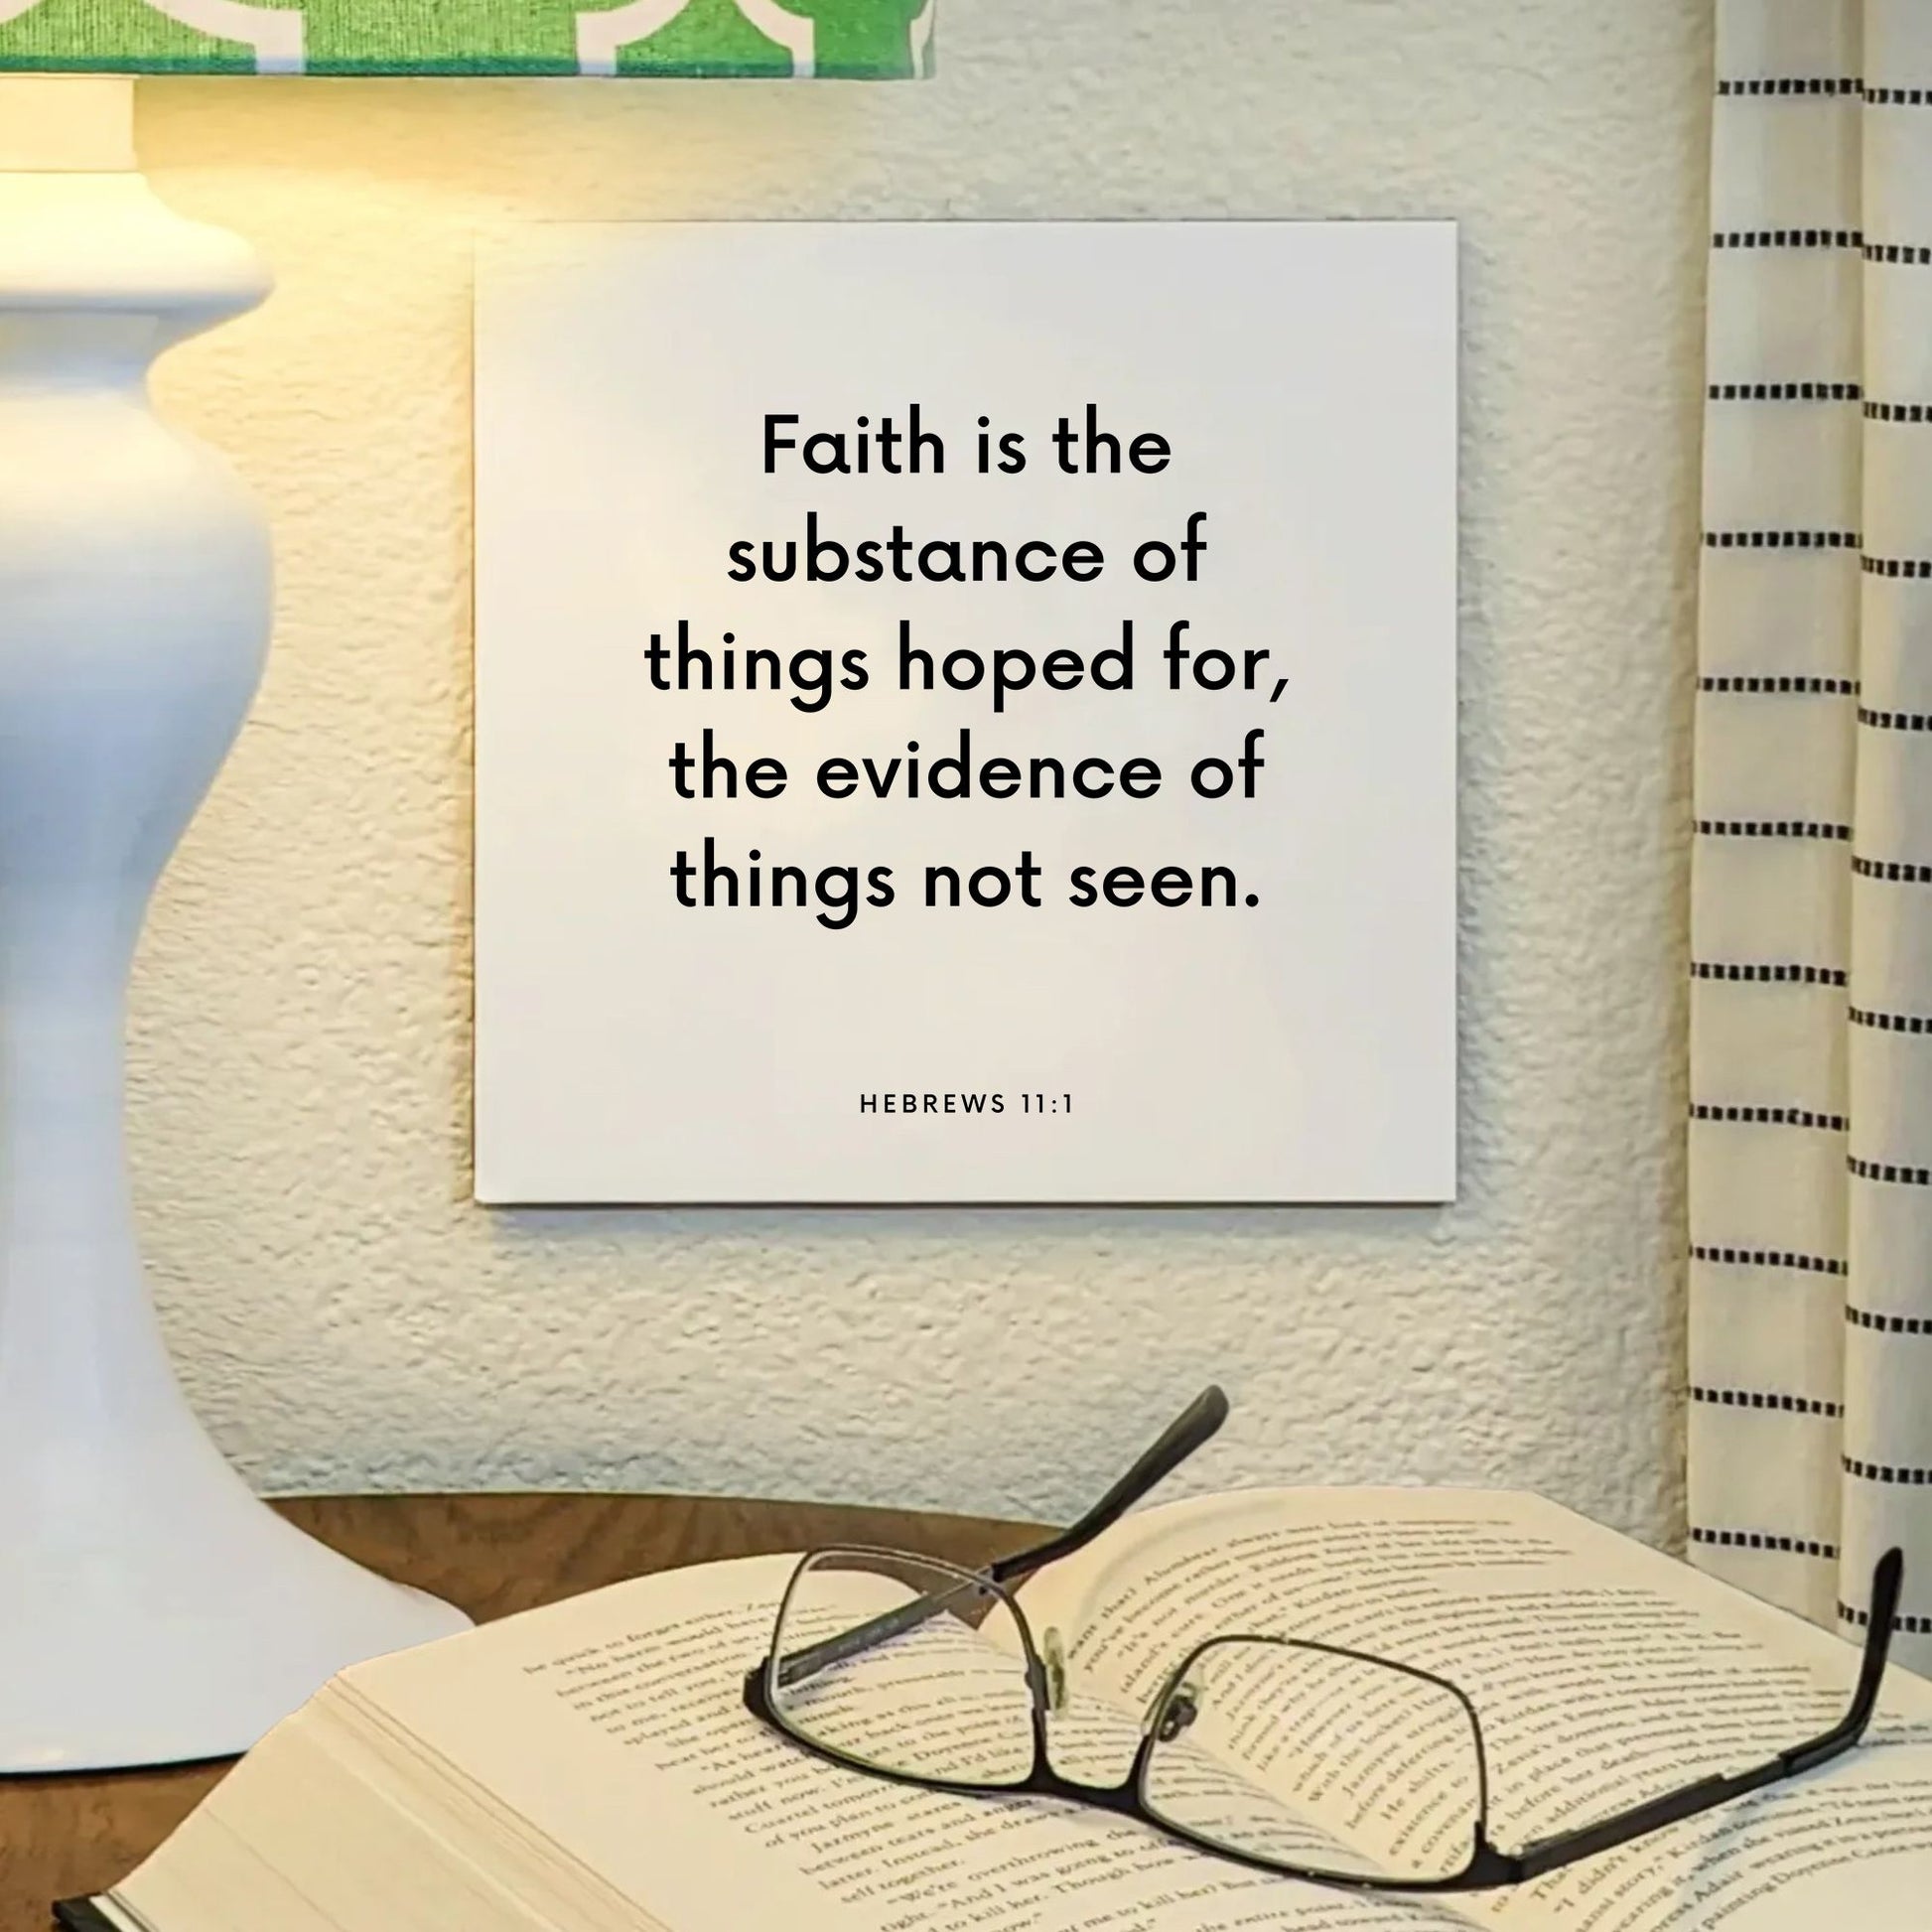 Lamp mouting of the scripture tile for Hebrews 11:1 - "Faith is the substance of things hoped for"